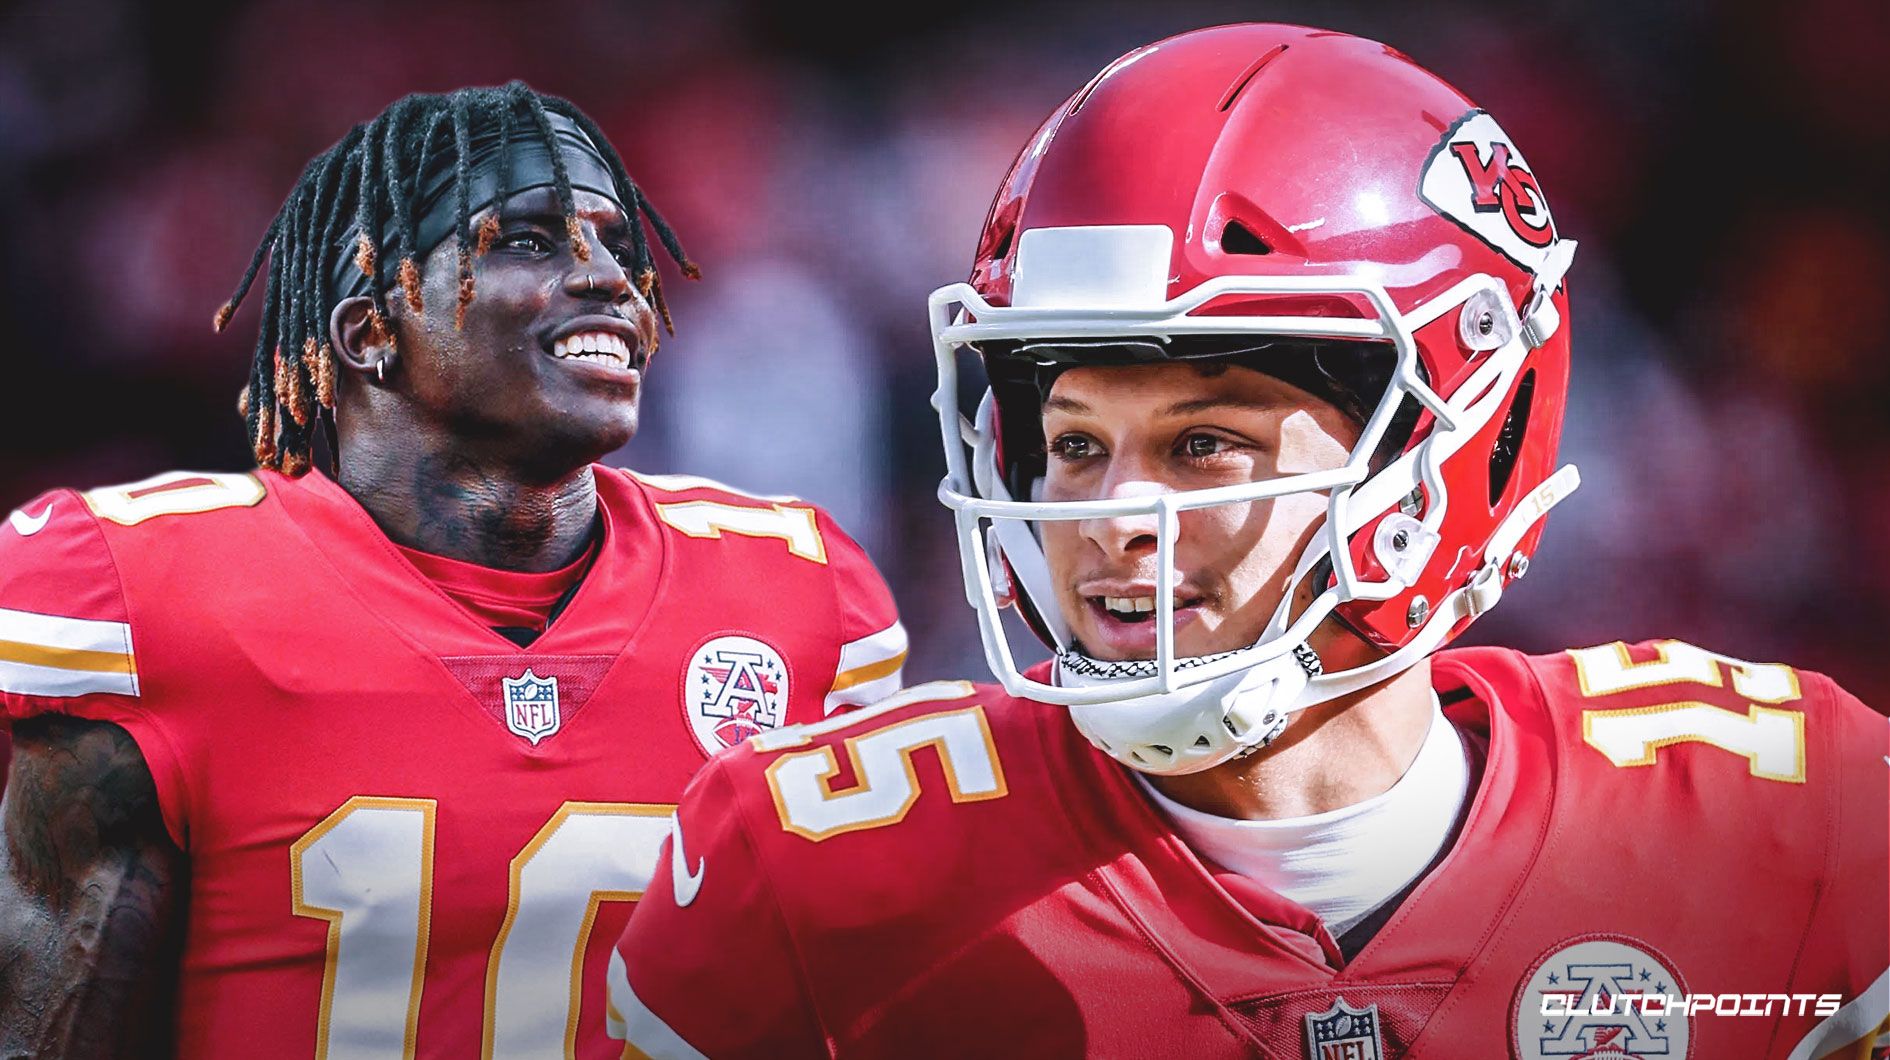 Chiefs news: Patrick Mahomes excited to have Tyreek Hill back with Kansas City